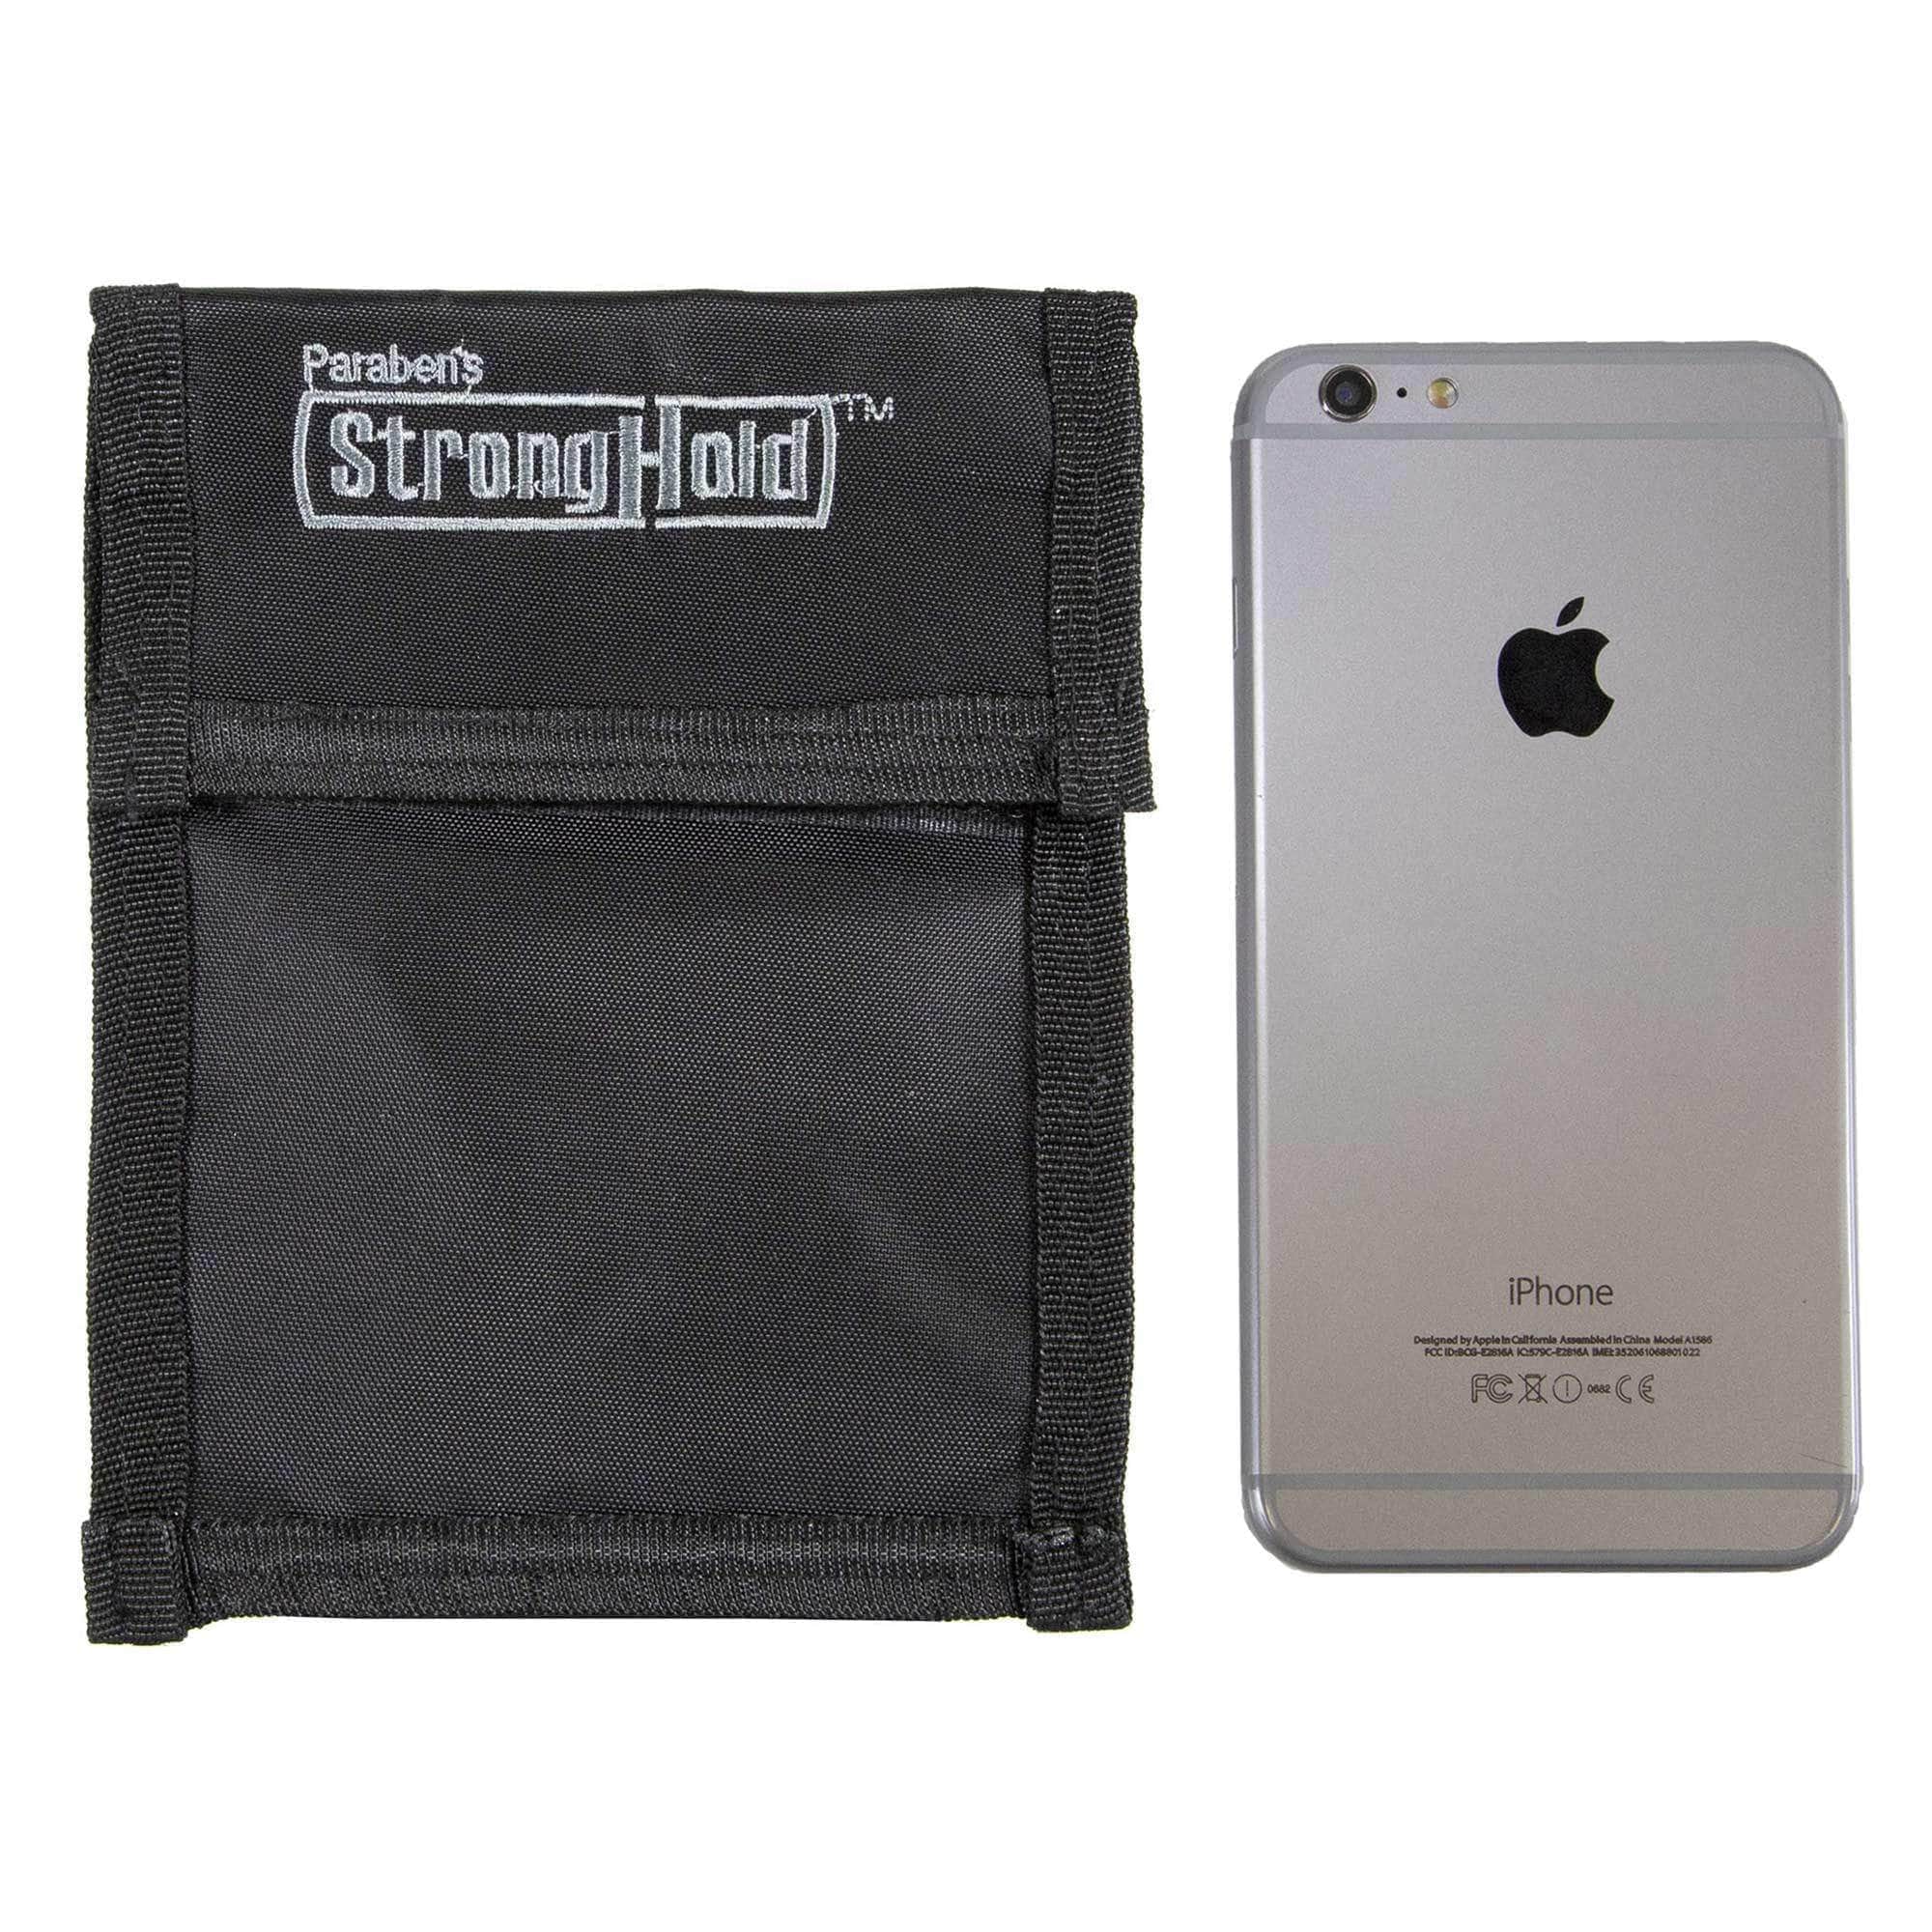 ID Stronghold  Small Stronghold Faraday Bag - Black